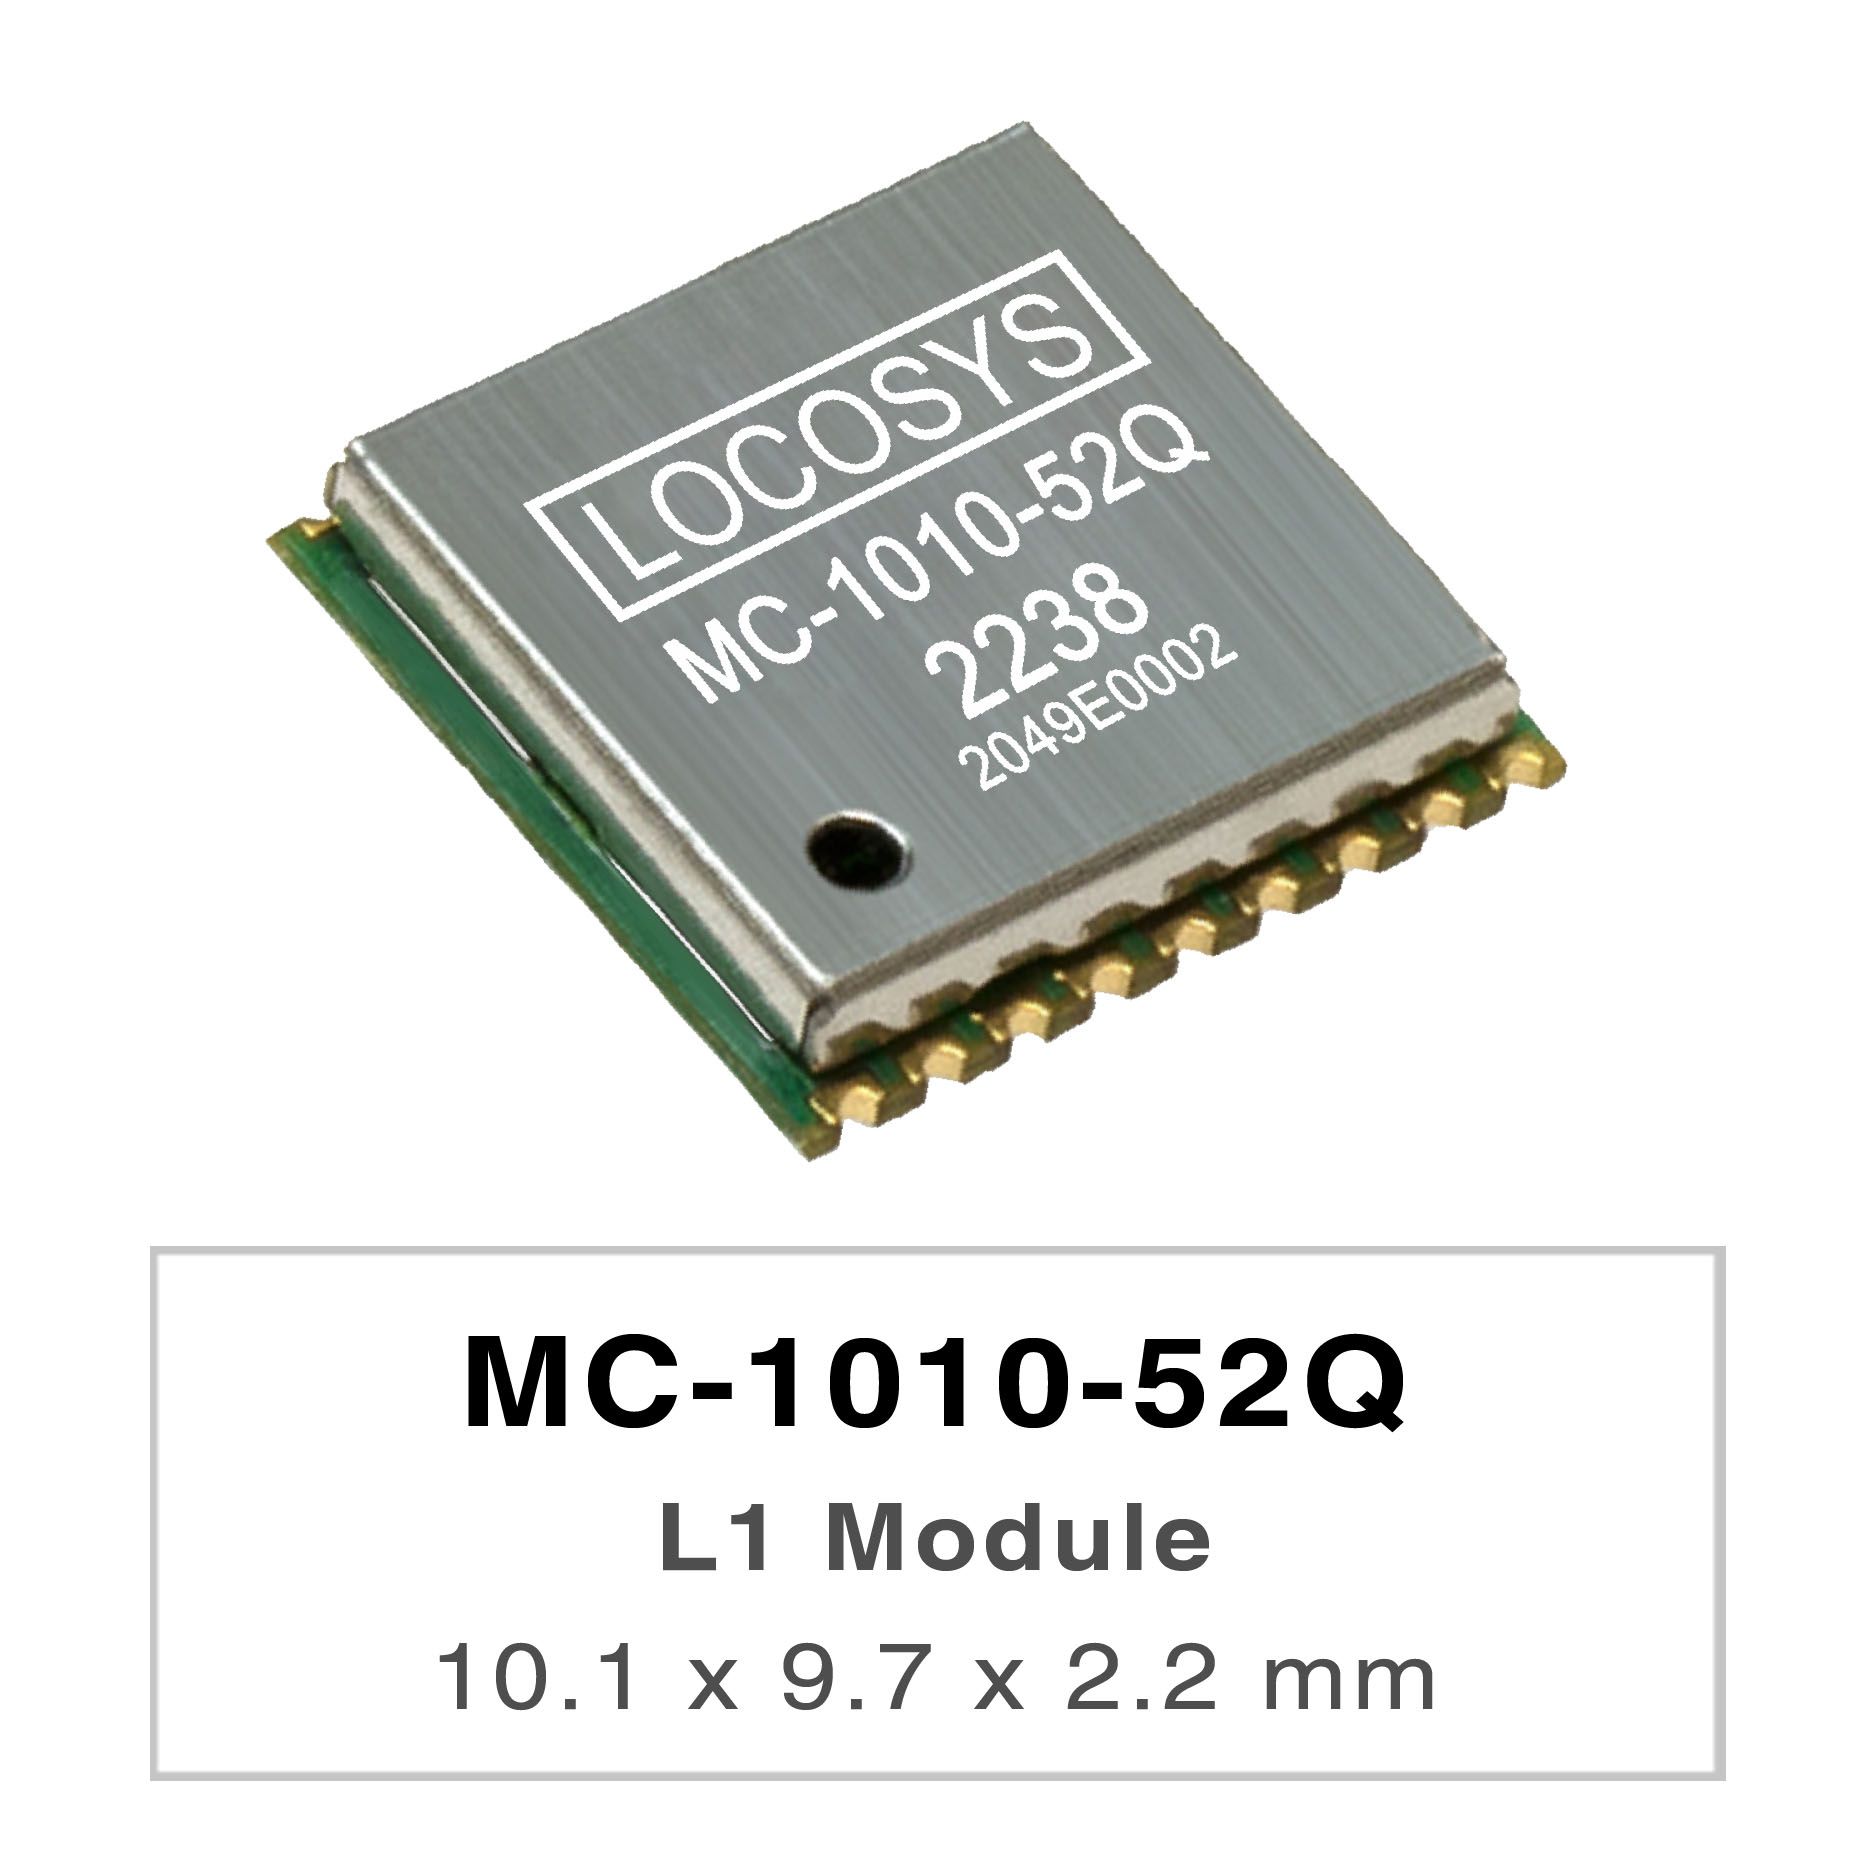 LOCOSYS MC-1010-52Q is a complete standalone GNSS module.